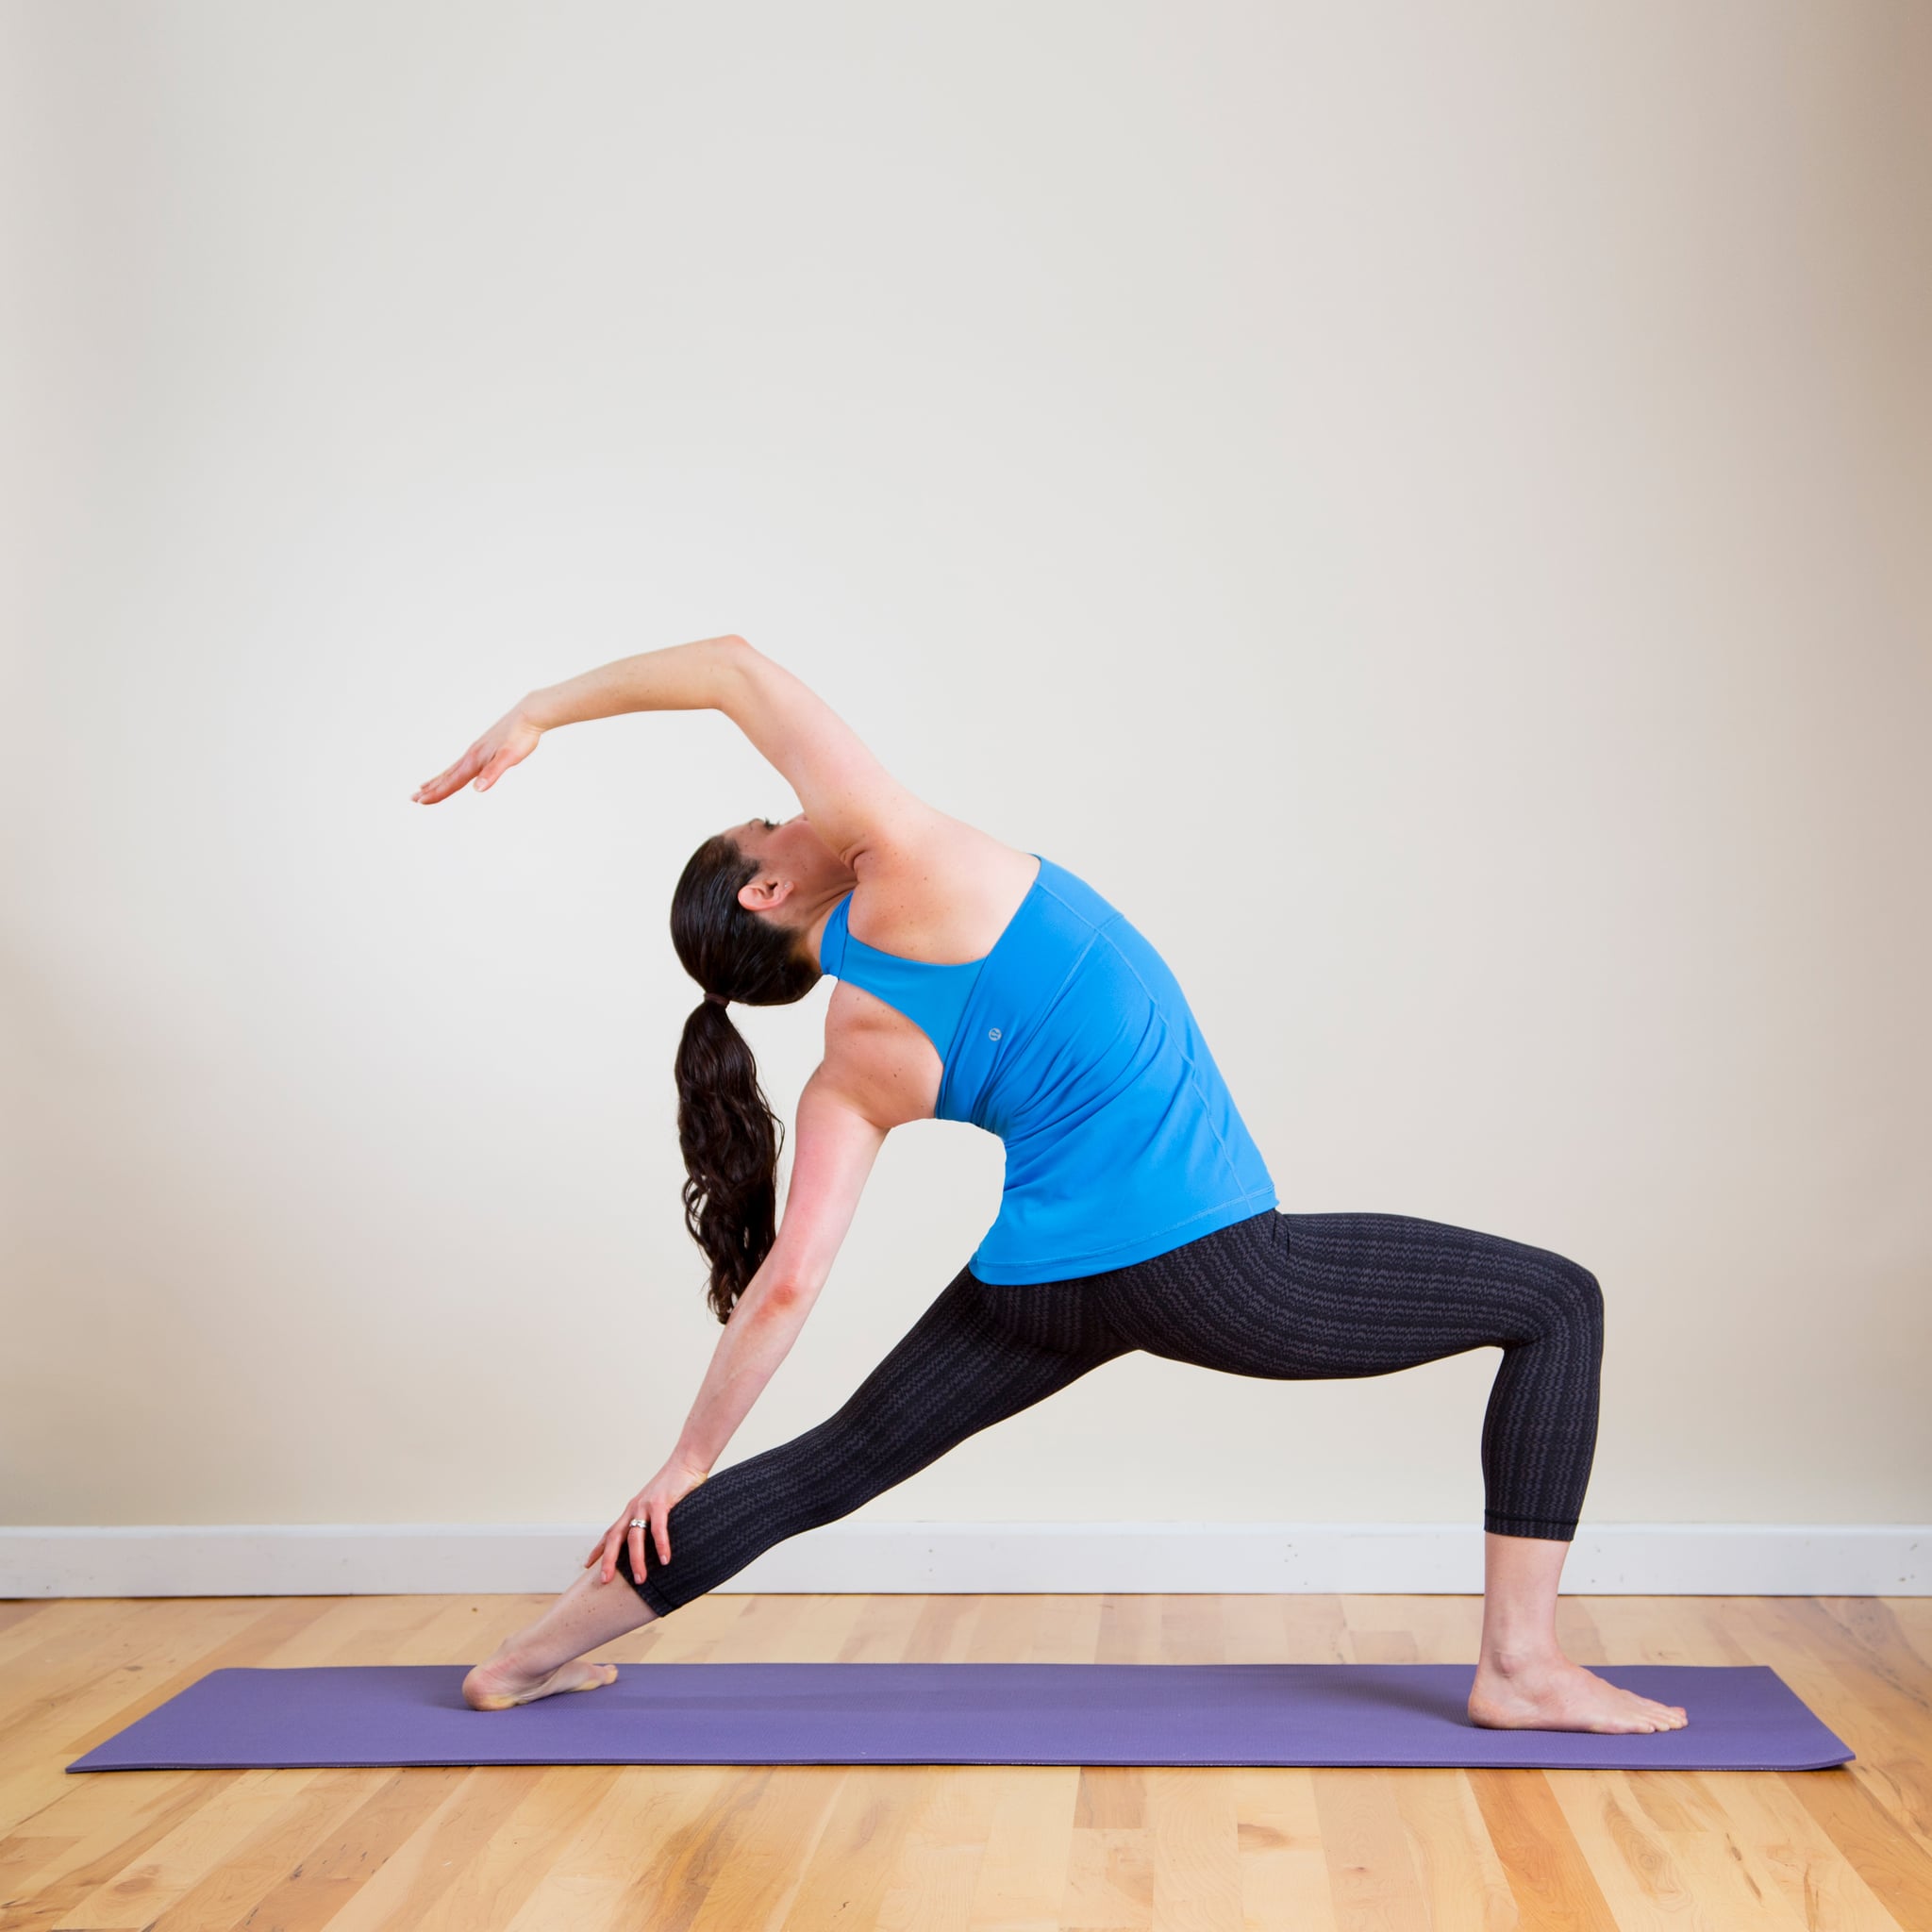 4 Underrated Yoga Poses You're Overlooking In Your Practice - Yoga Journal